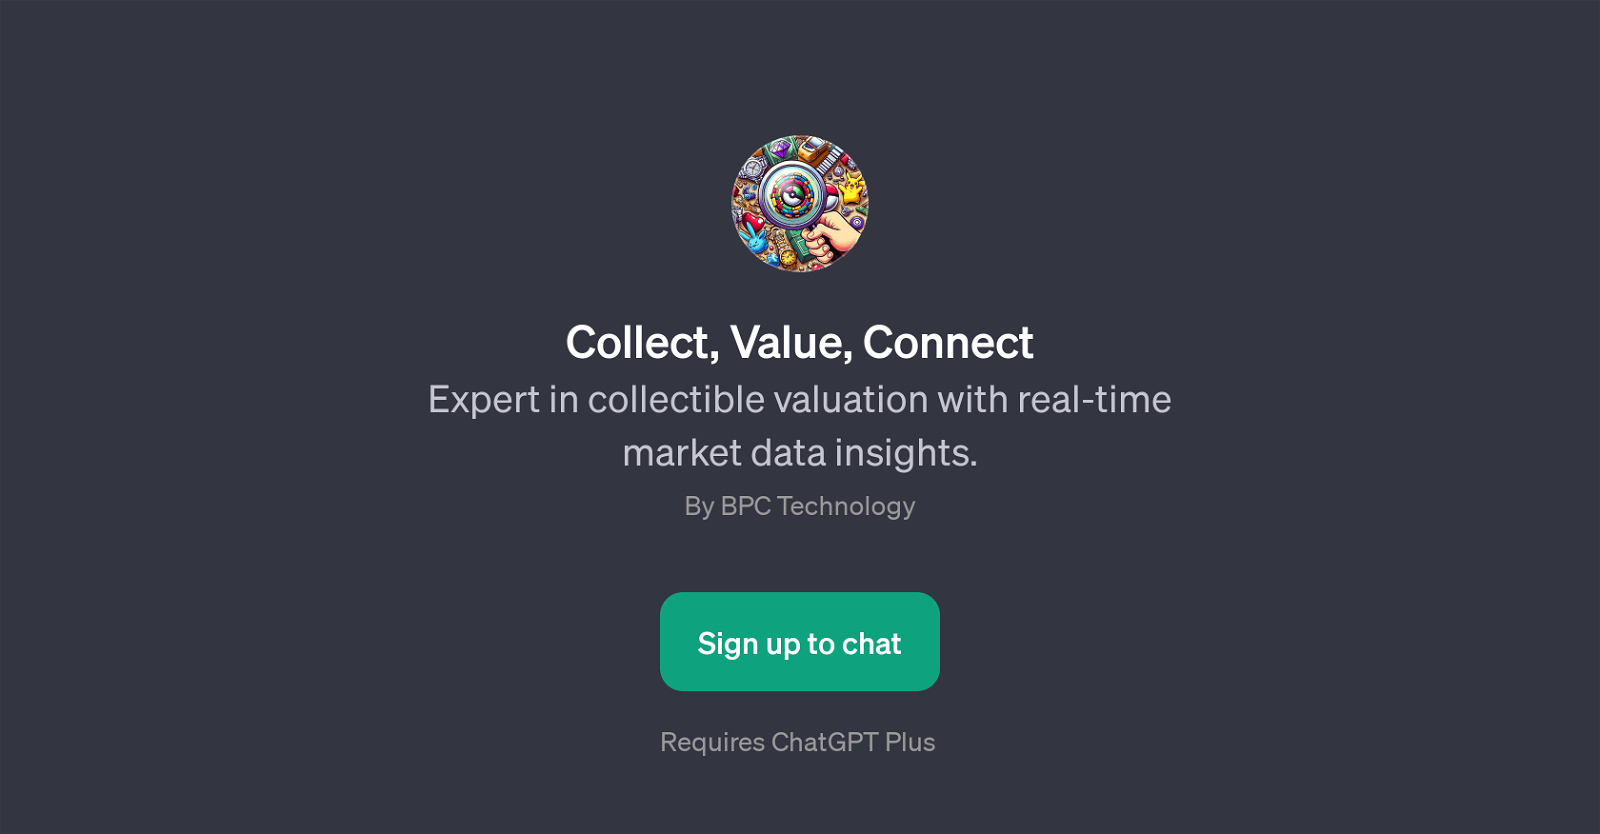 Collect, Value, Connect website